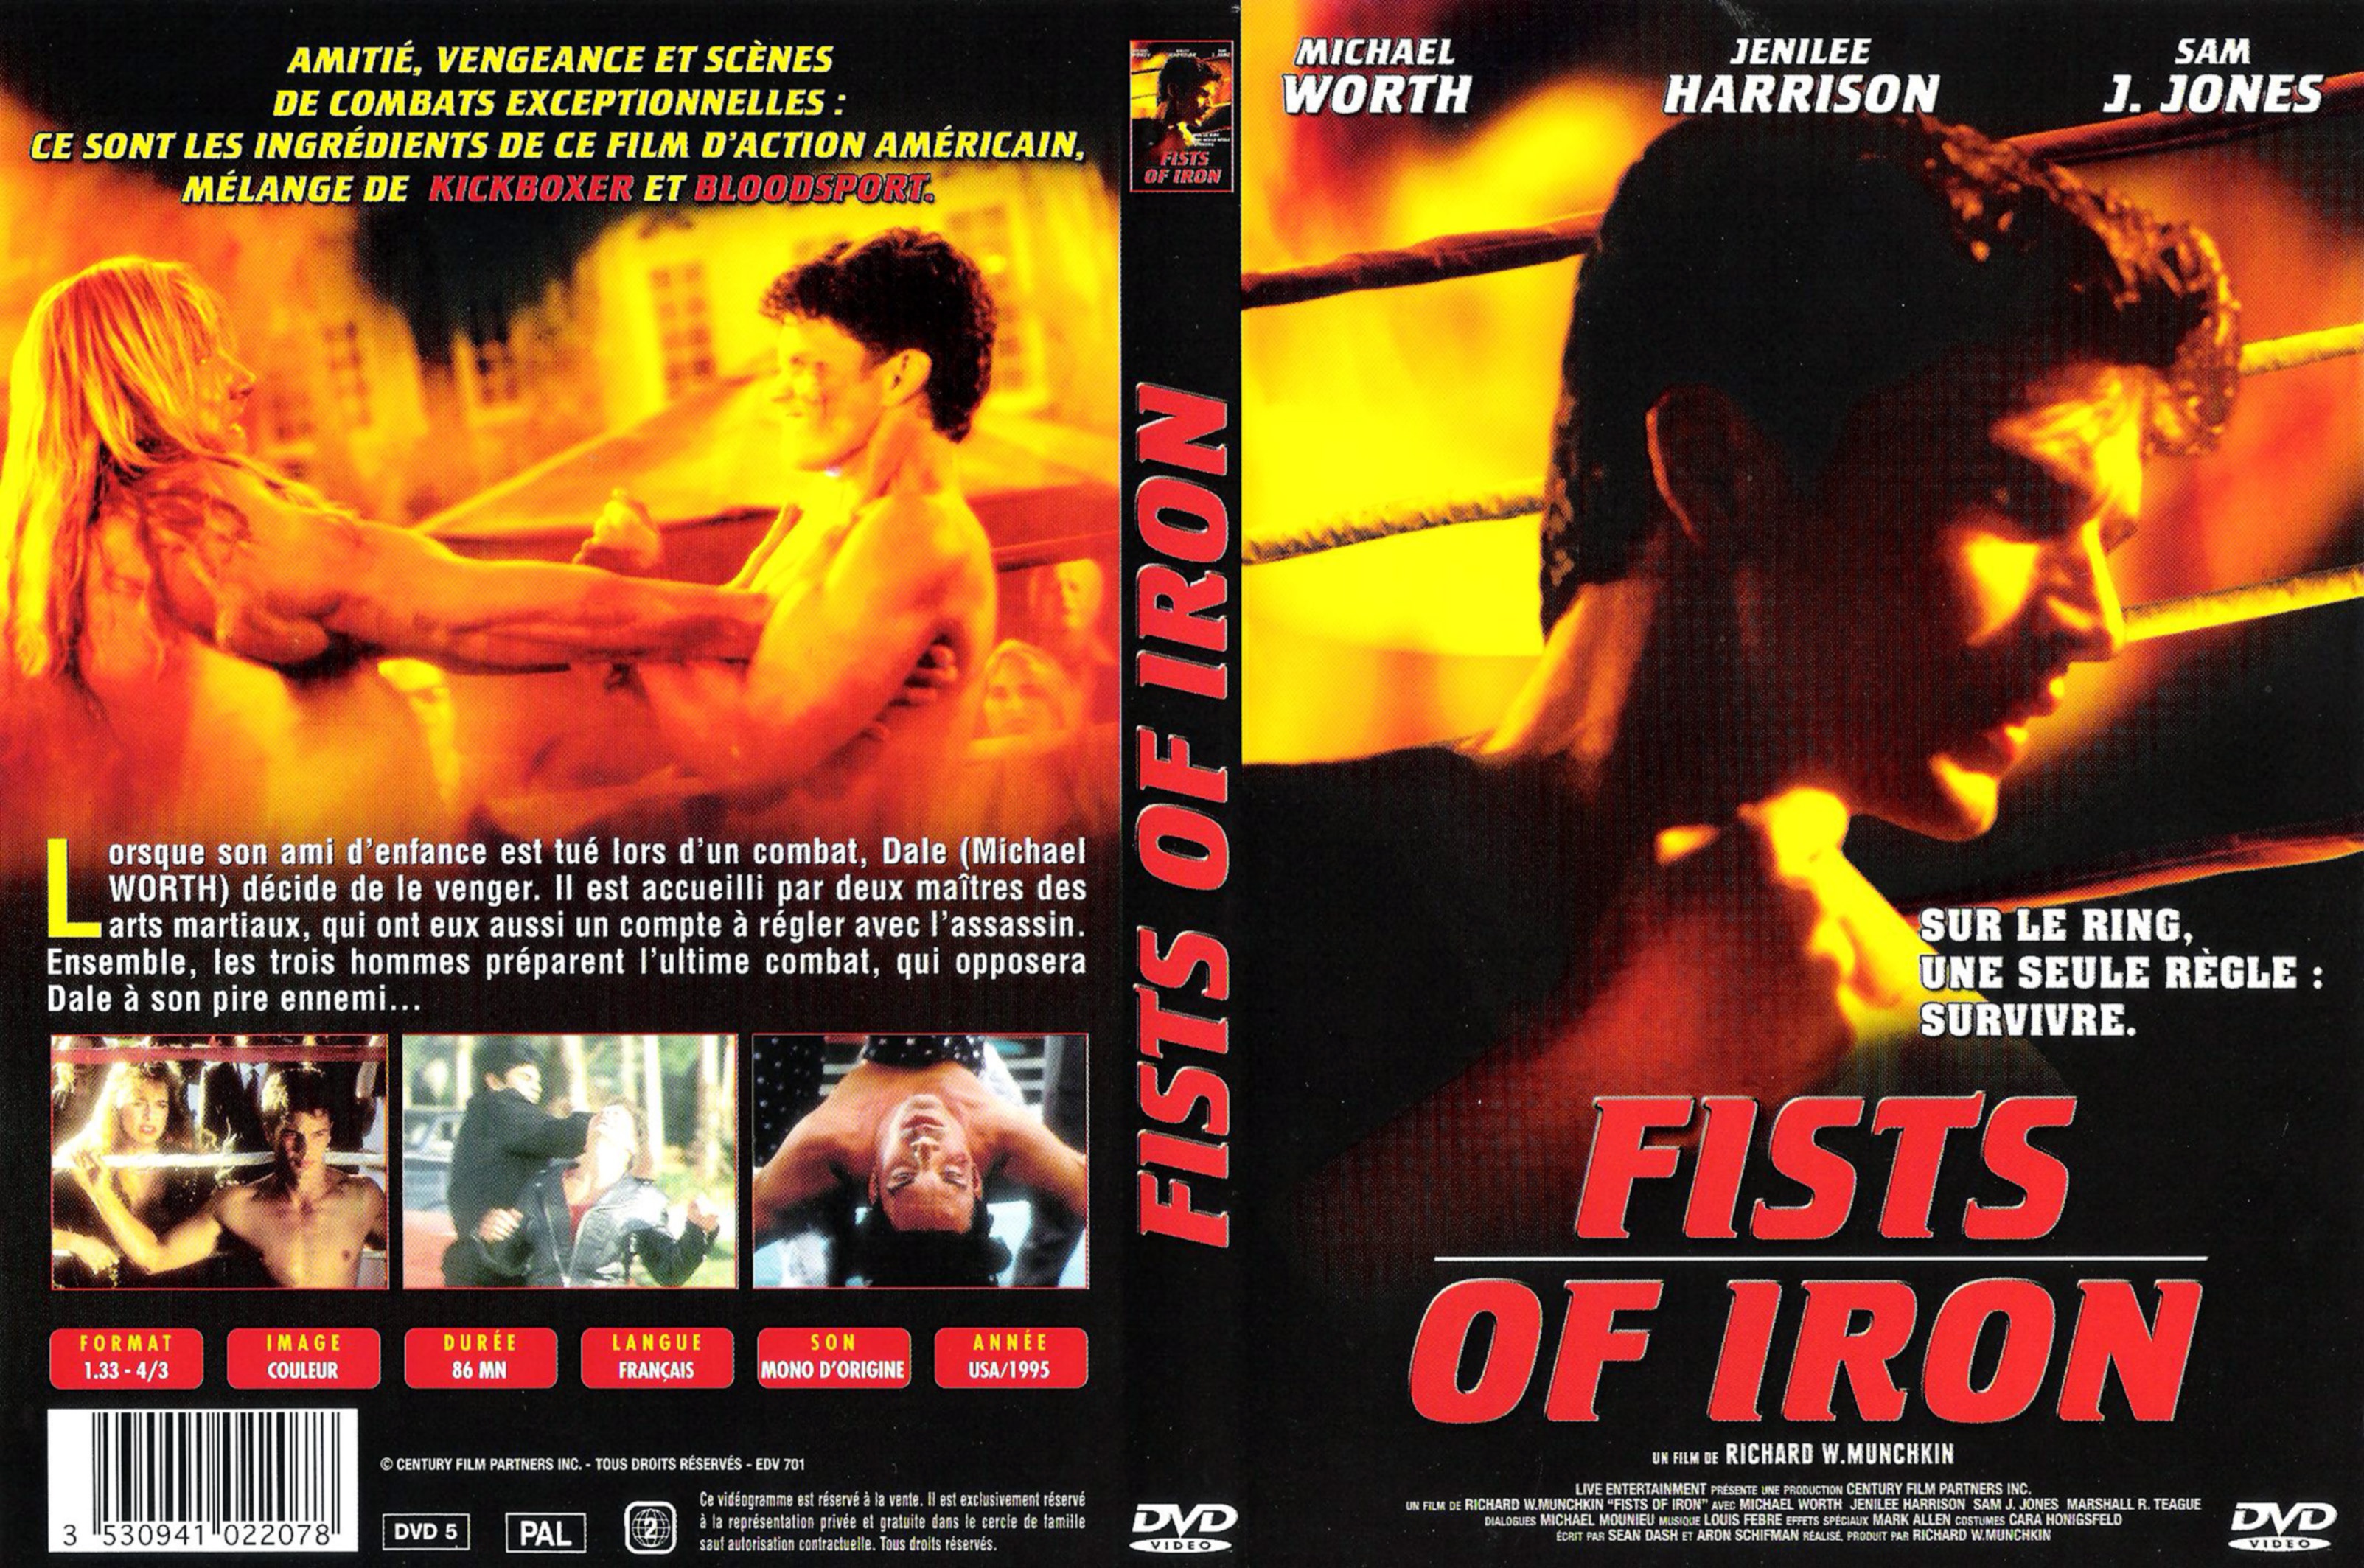 Jaquette DVD Fists of iron